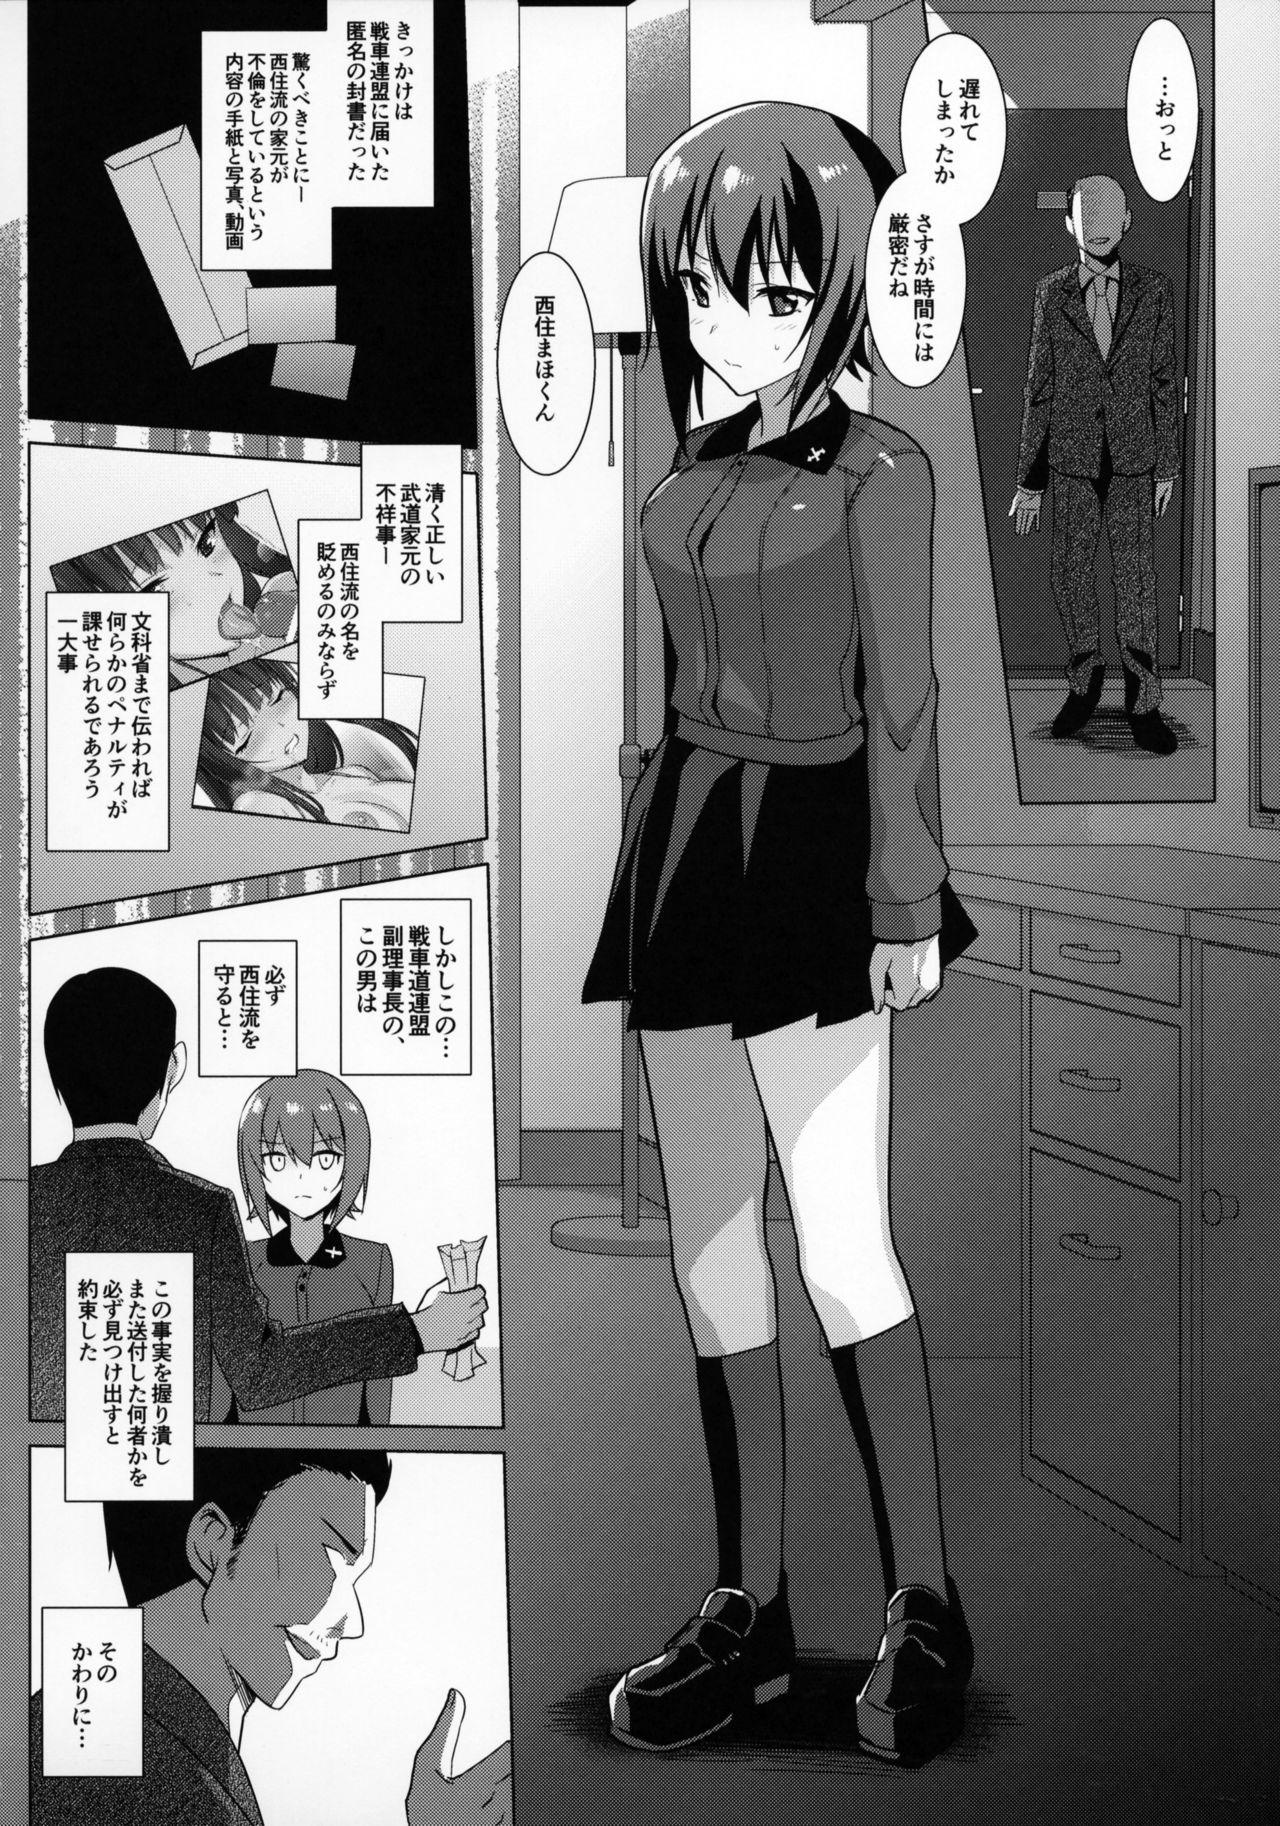 Ass Fucked LET ME DIE - Girls und panzer Pink Pussy - Page 5